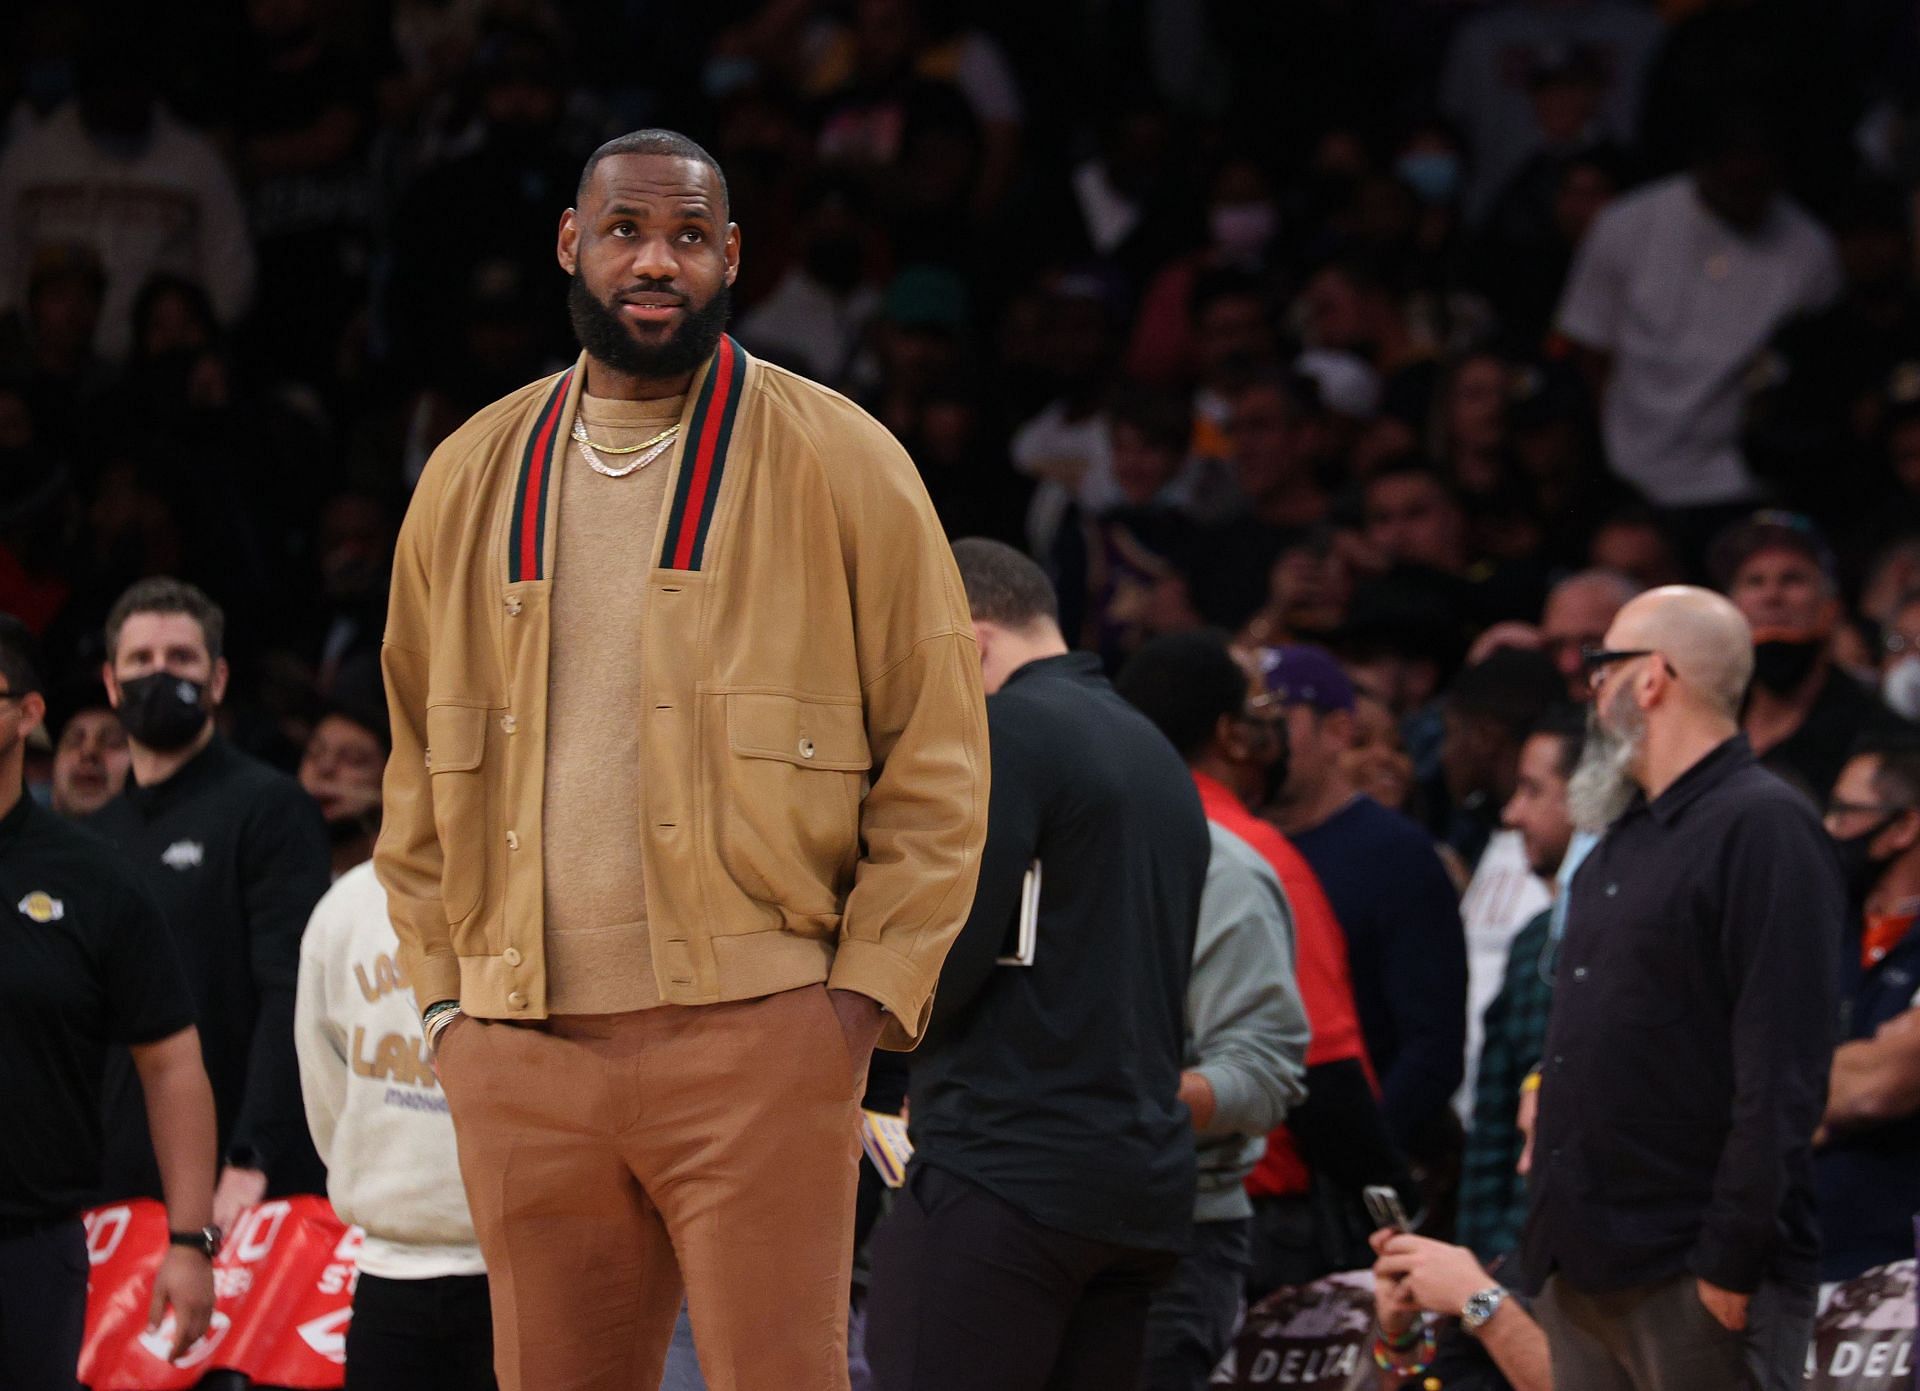 Los Angeles Lakers All-Star LeBron James dealing with injuries this season